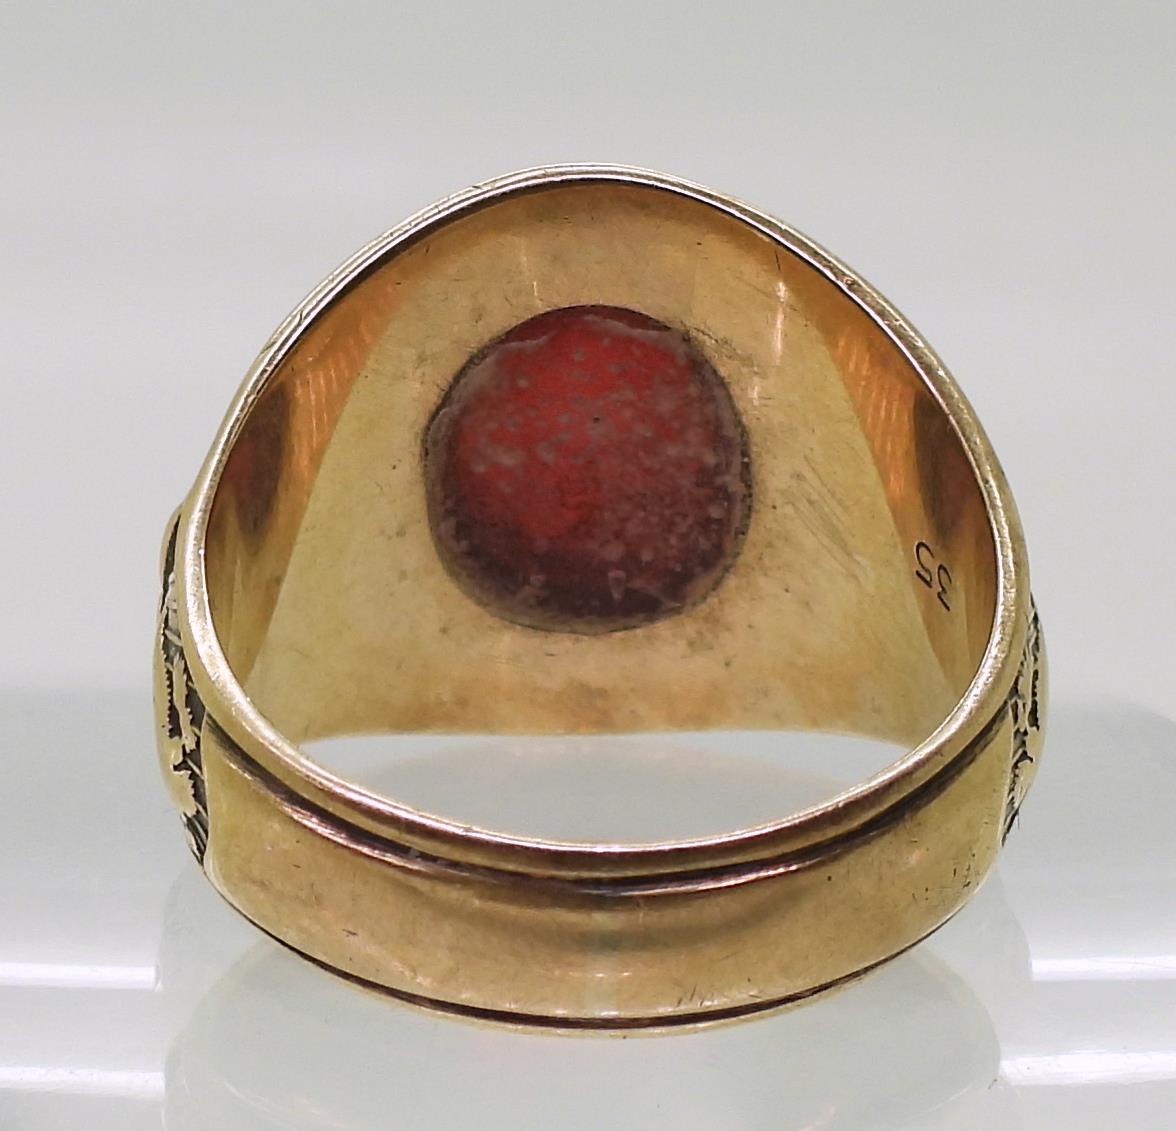 A 10k gold Balfour brand American college ring, set with a red glass gem, for The Engineer School, - Image 4 of 4